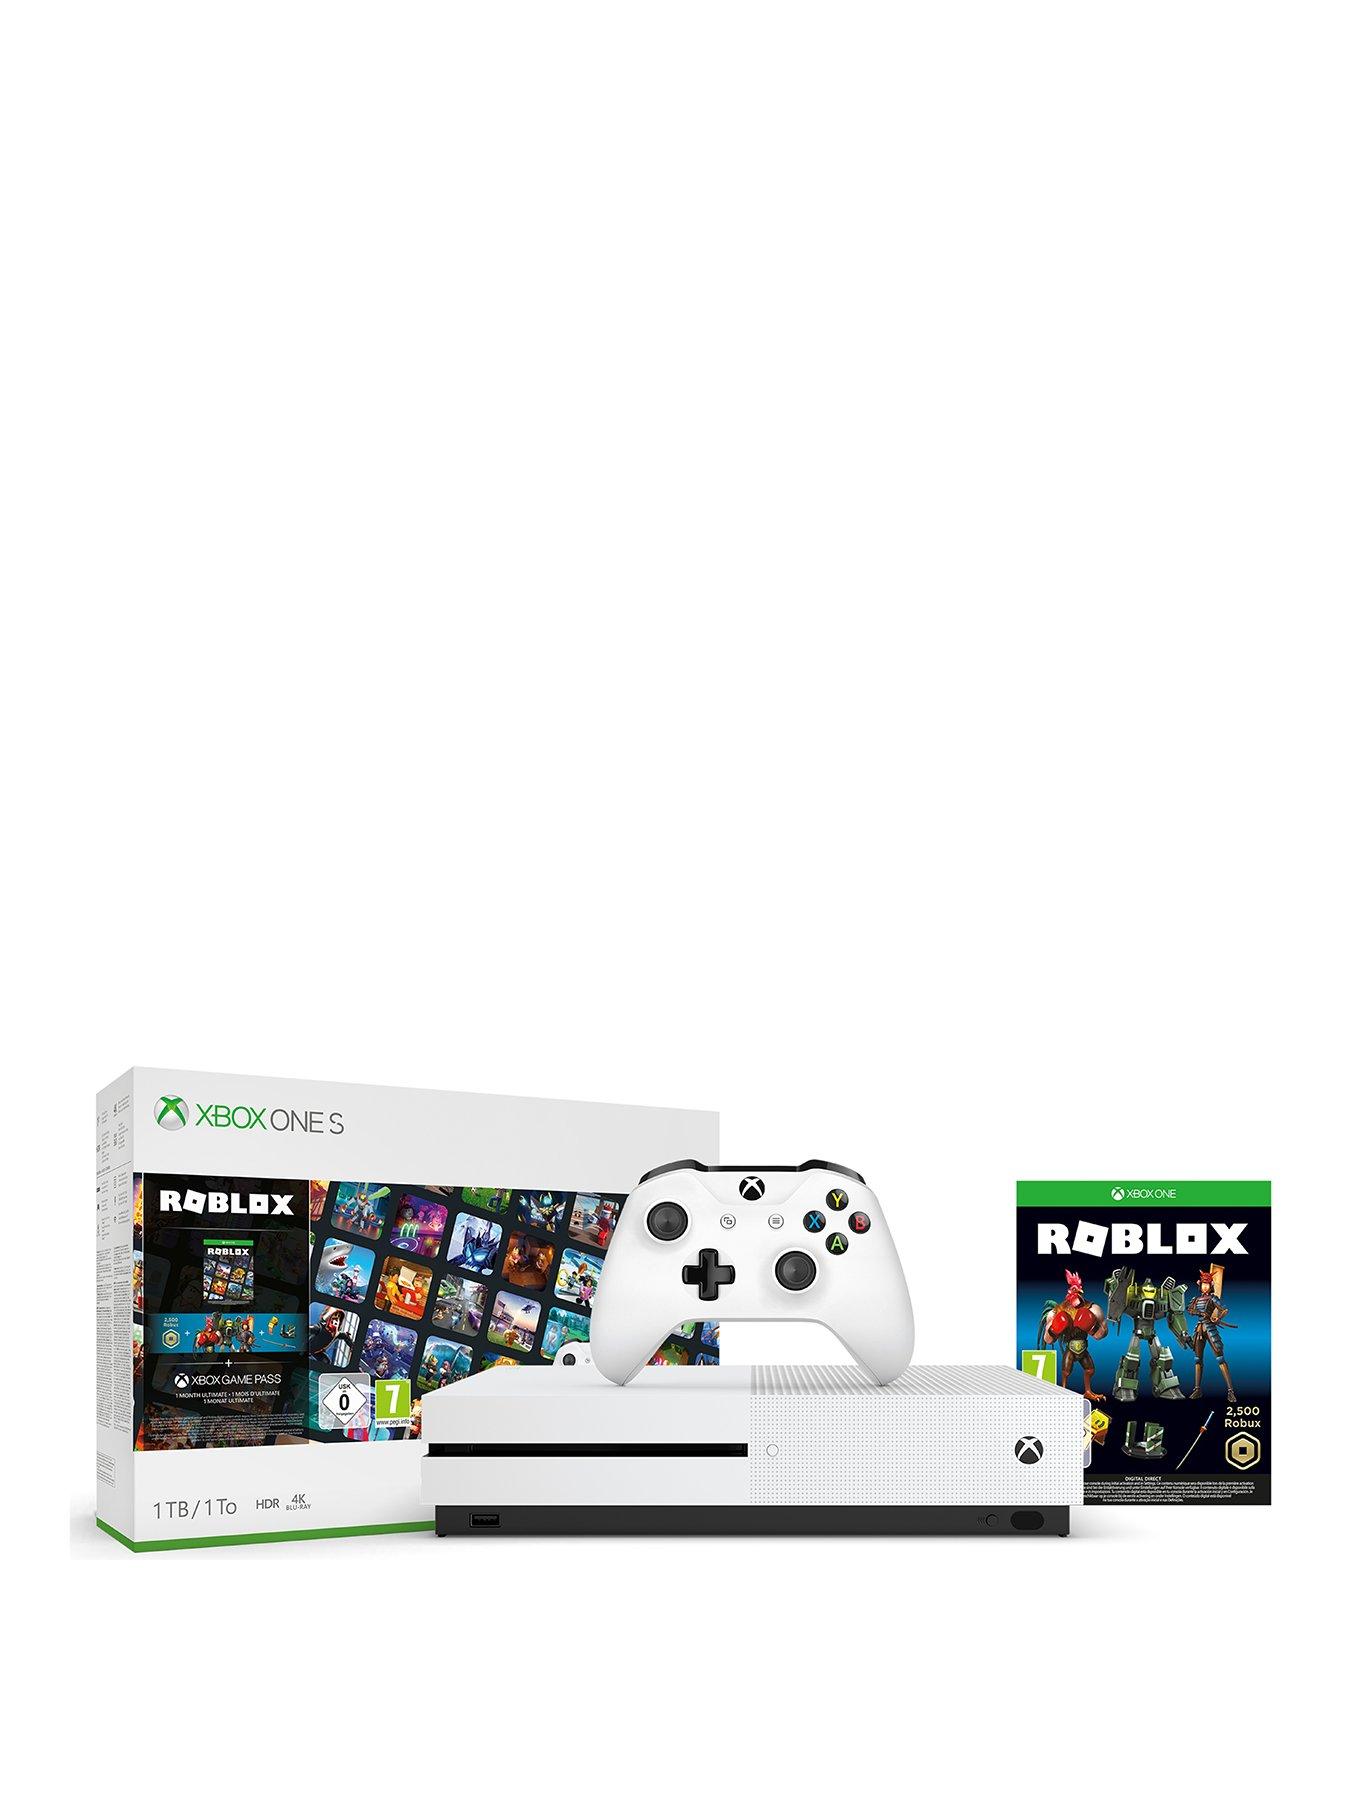 Xbox One S Roblox Bundle 1tb With Optional Extras Very Co Uk - suprising friend with 500 robux cards roblox groups